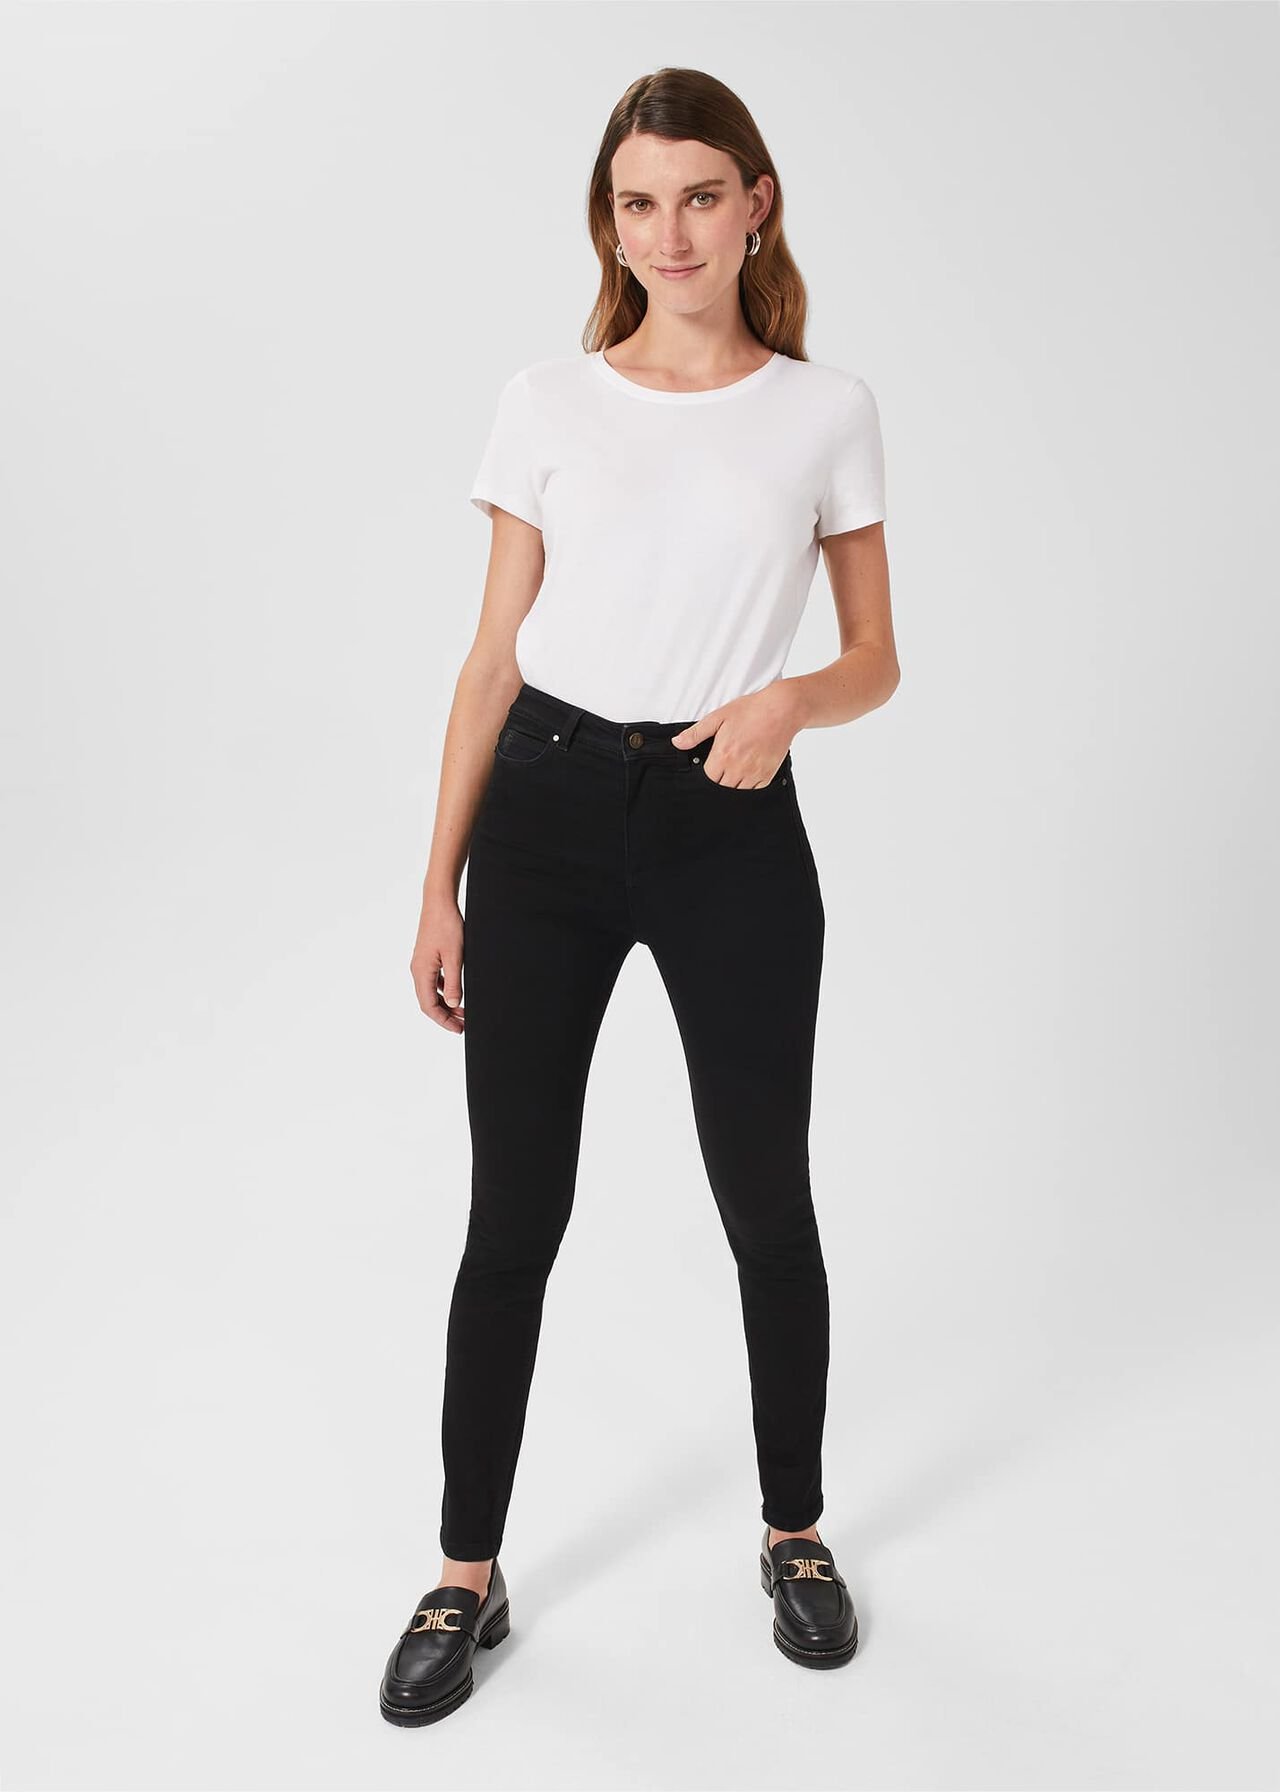 Gia Scuplting Jean With Stretch , Black, hi-res